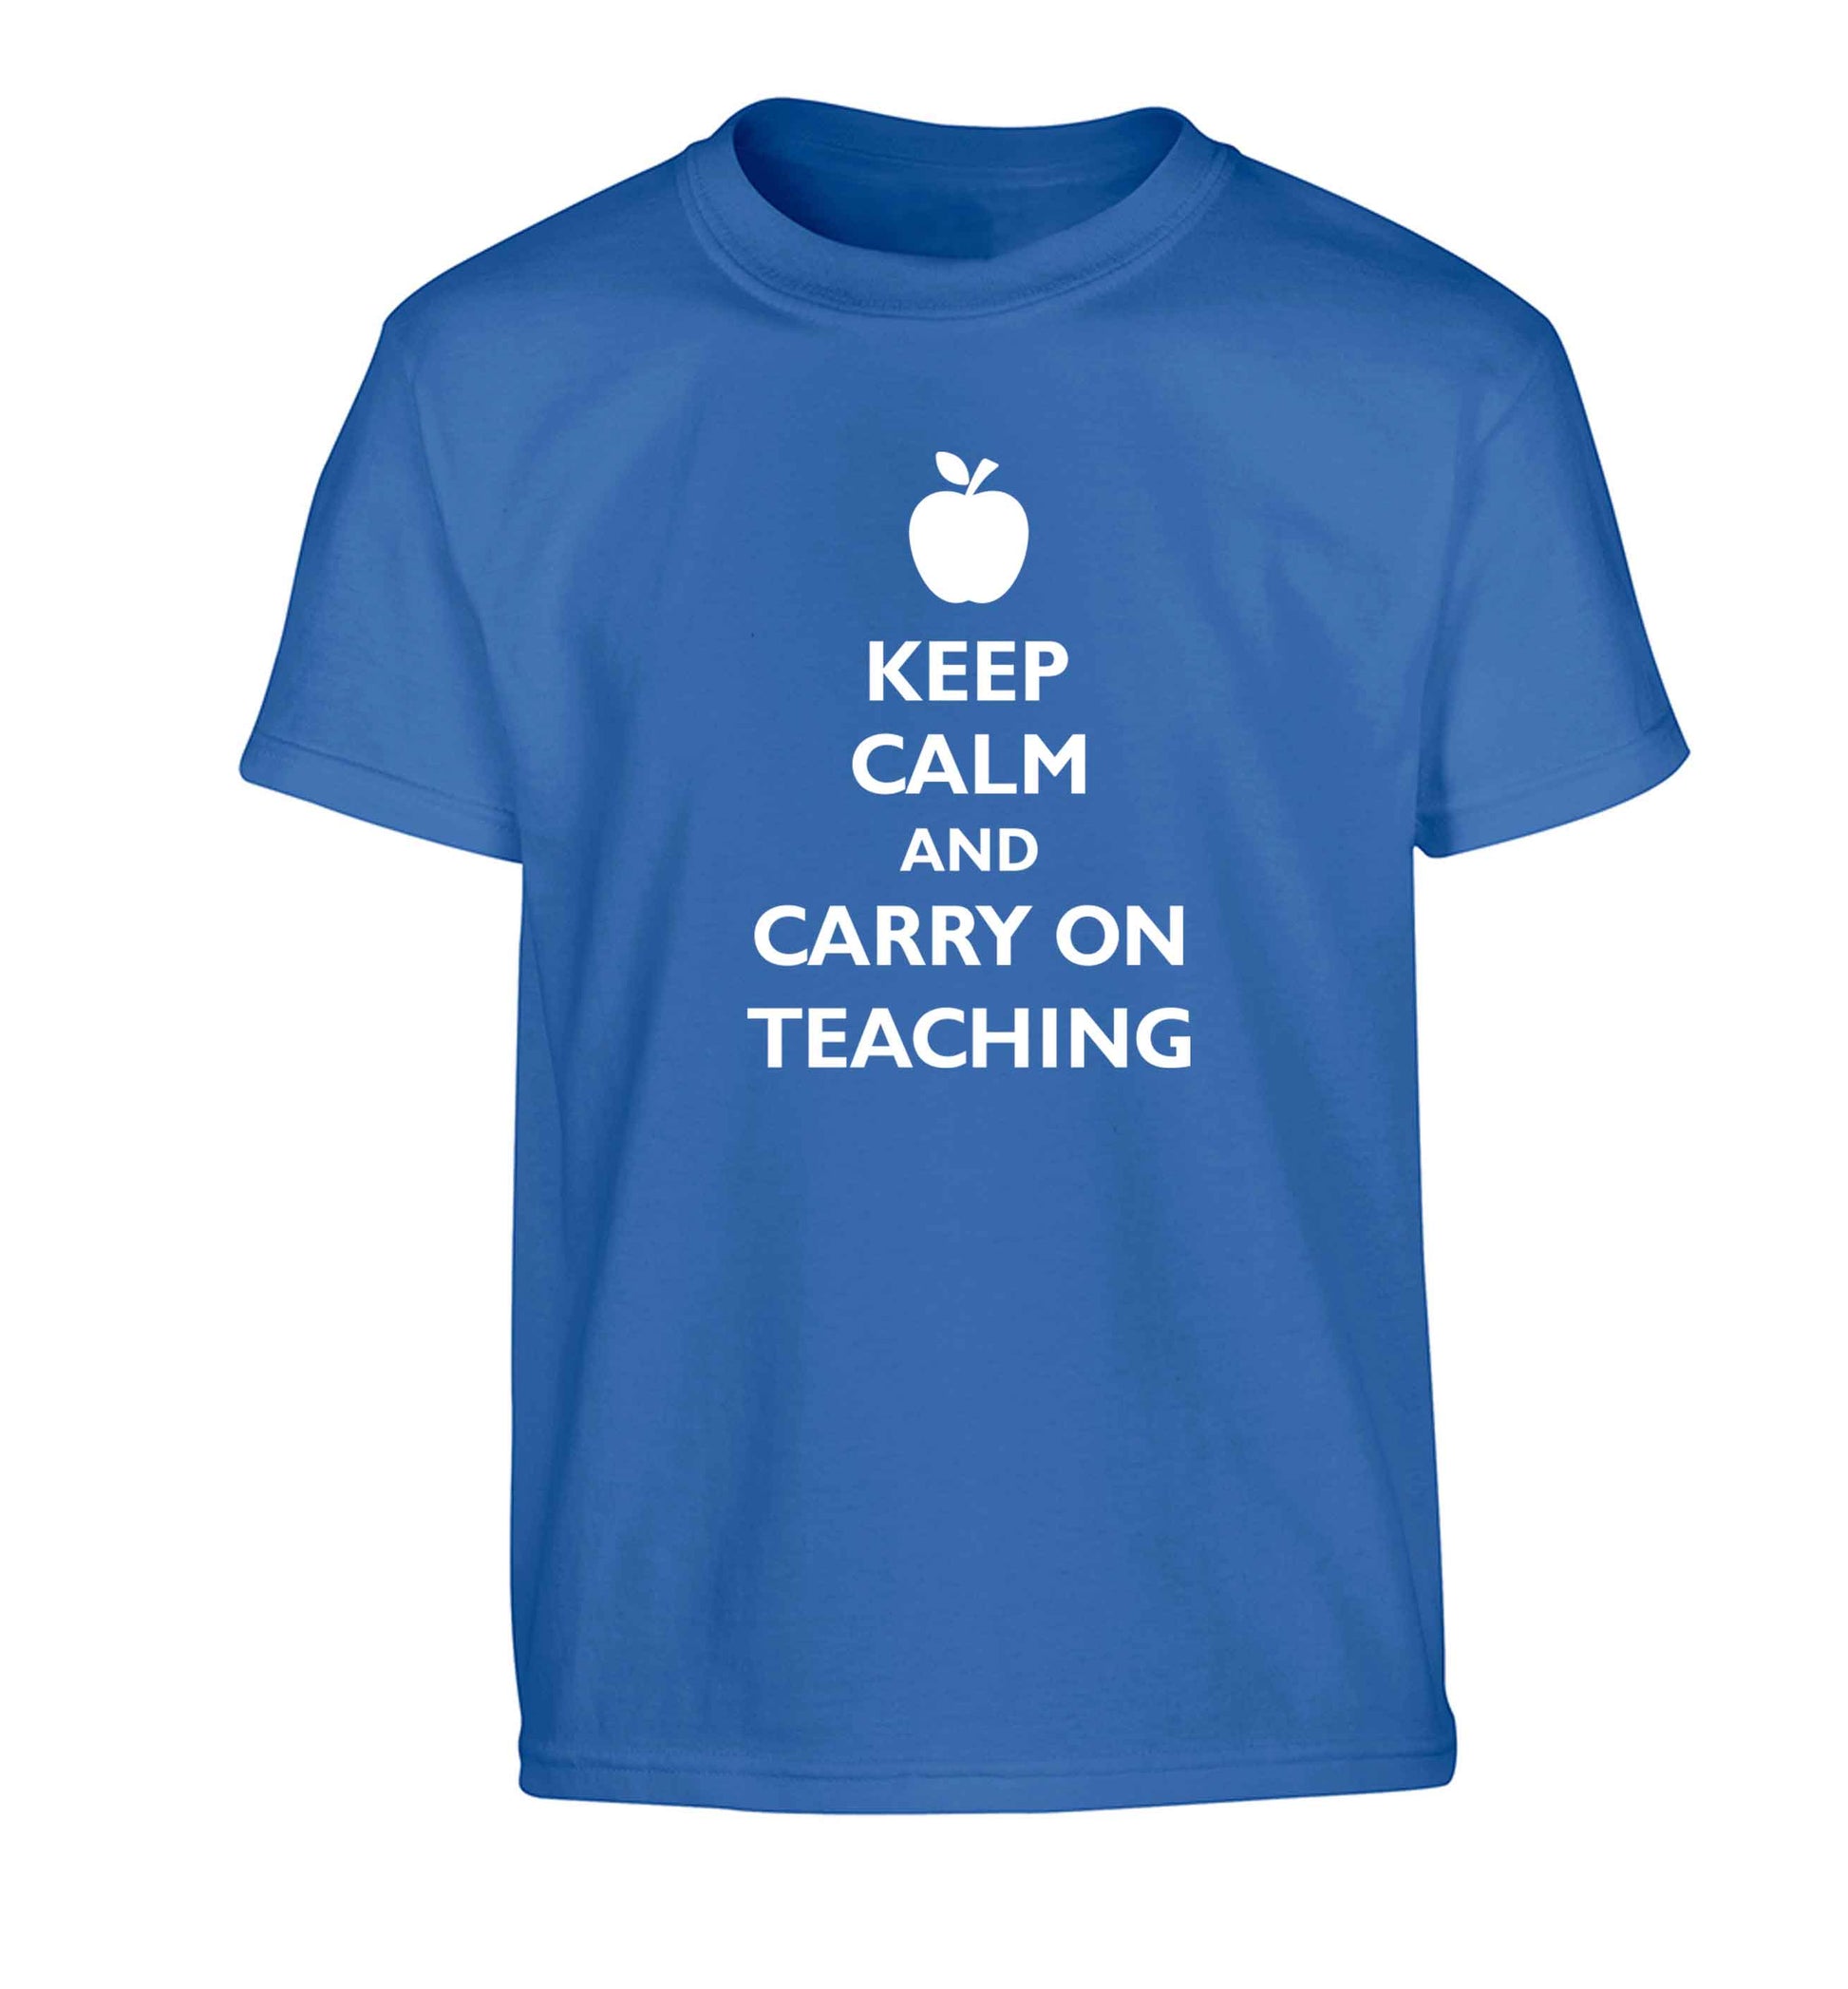 Keep calm and carry on teaching Children's blue Tshirt 12-13 Years